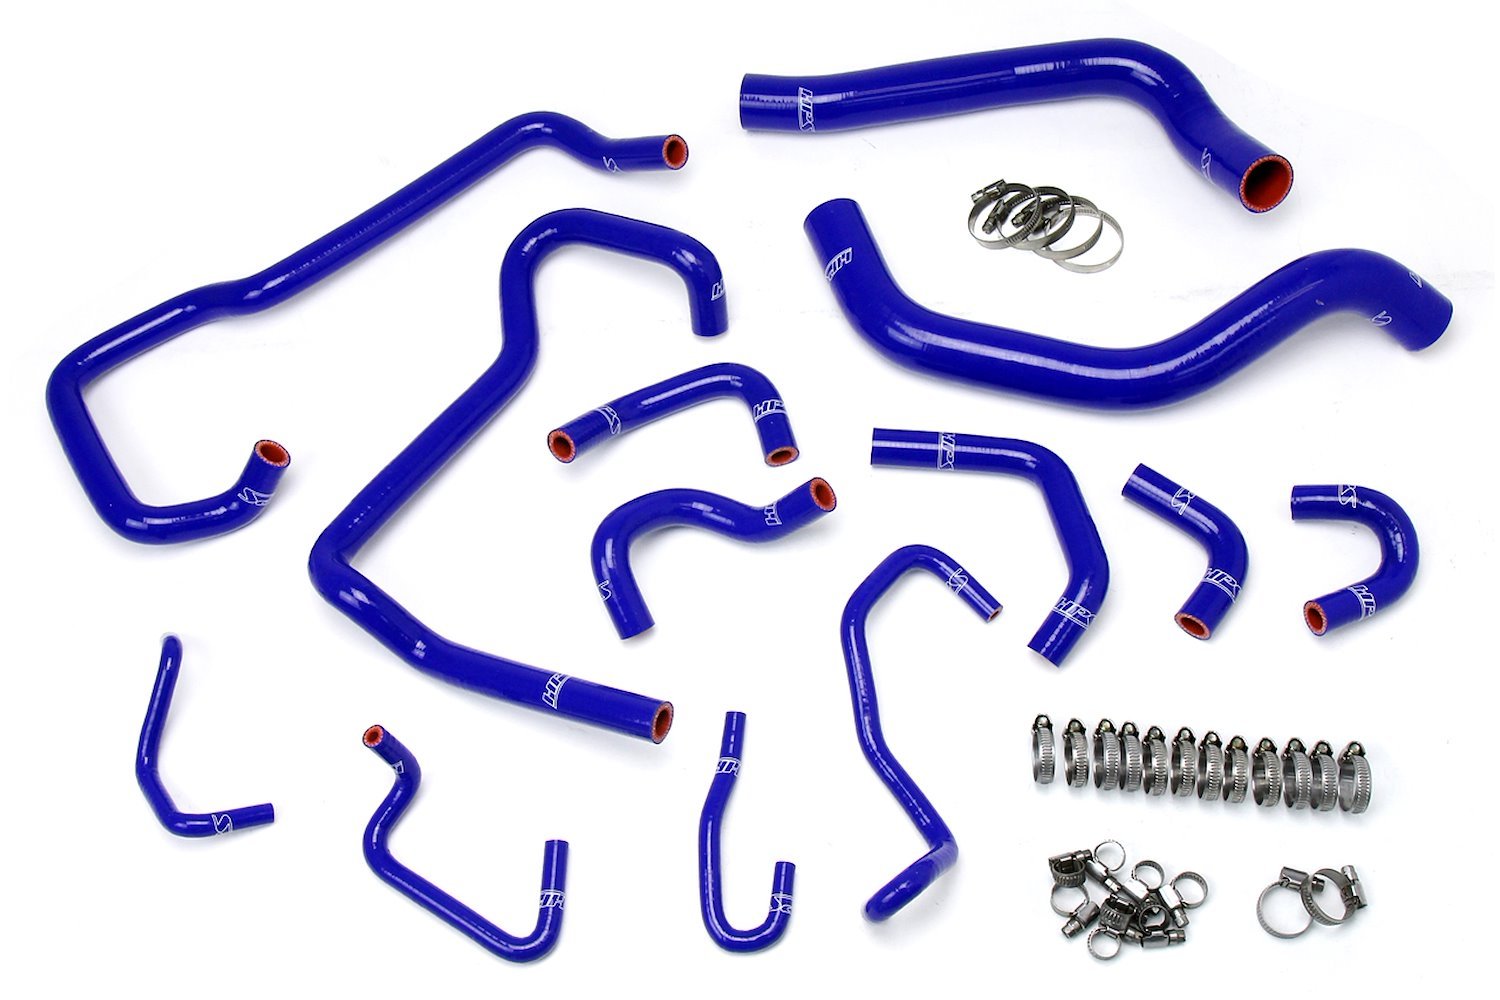 57-1581-BLUE Coolant Hose Kit, High-Temp 3-Ply Reinforced Silicone, Replace Rubber Radiator Heater Coolant Hoses